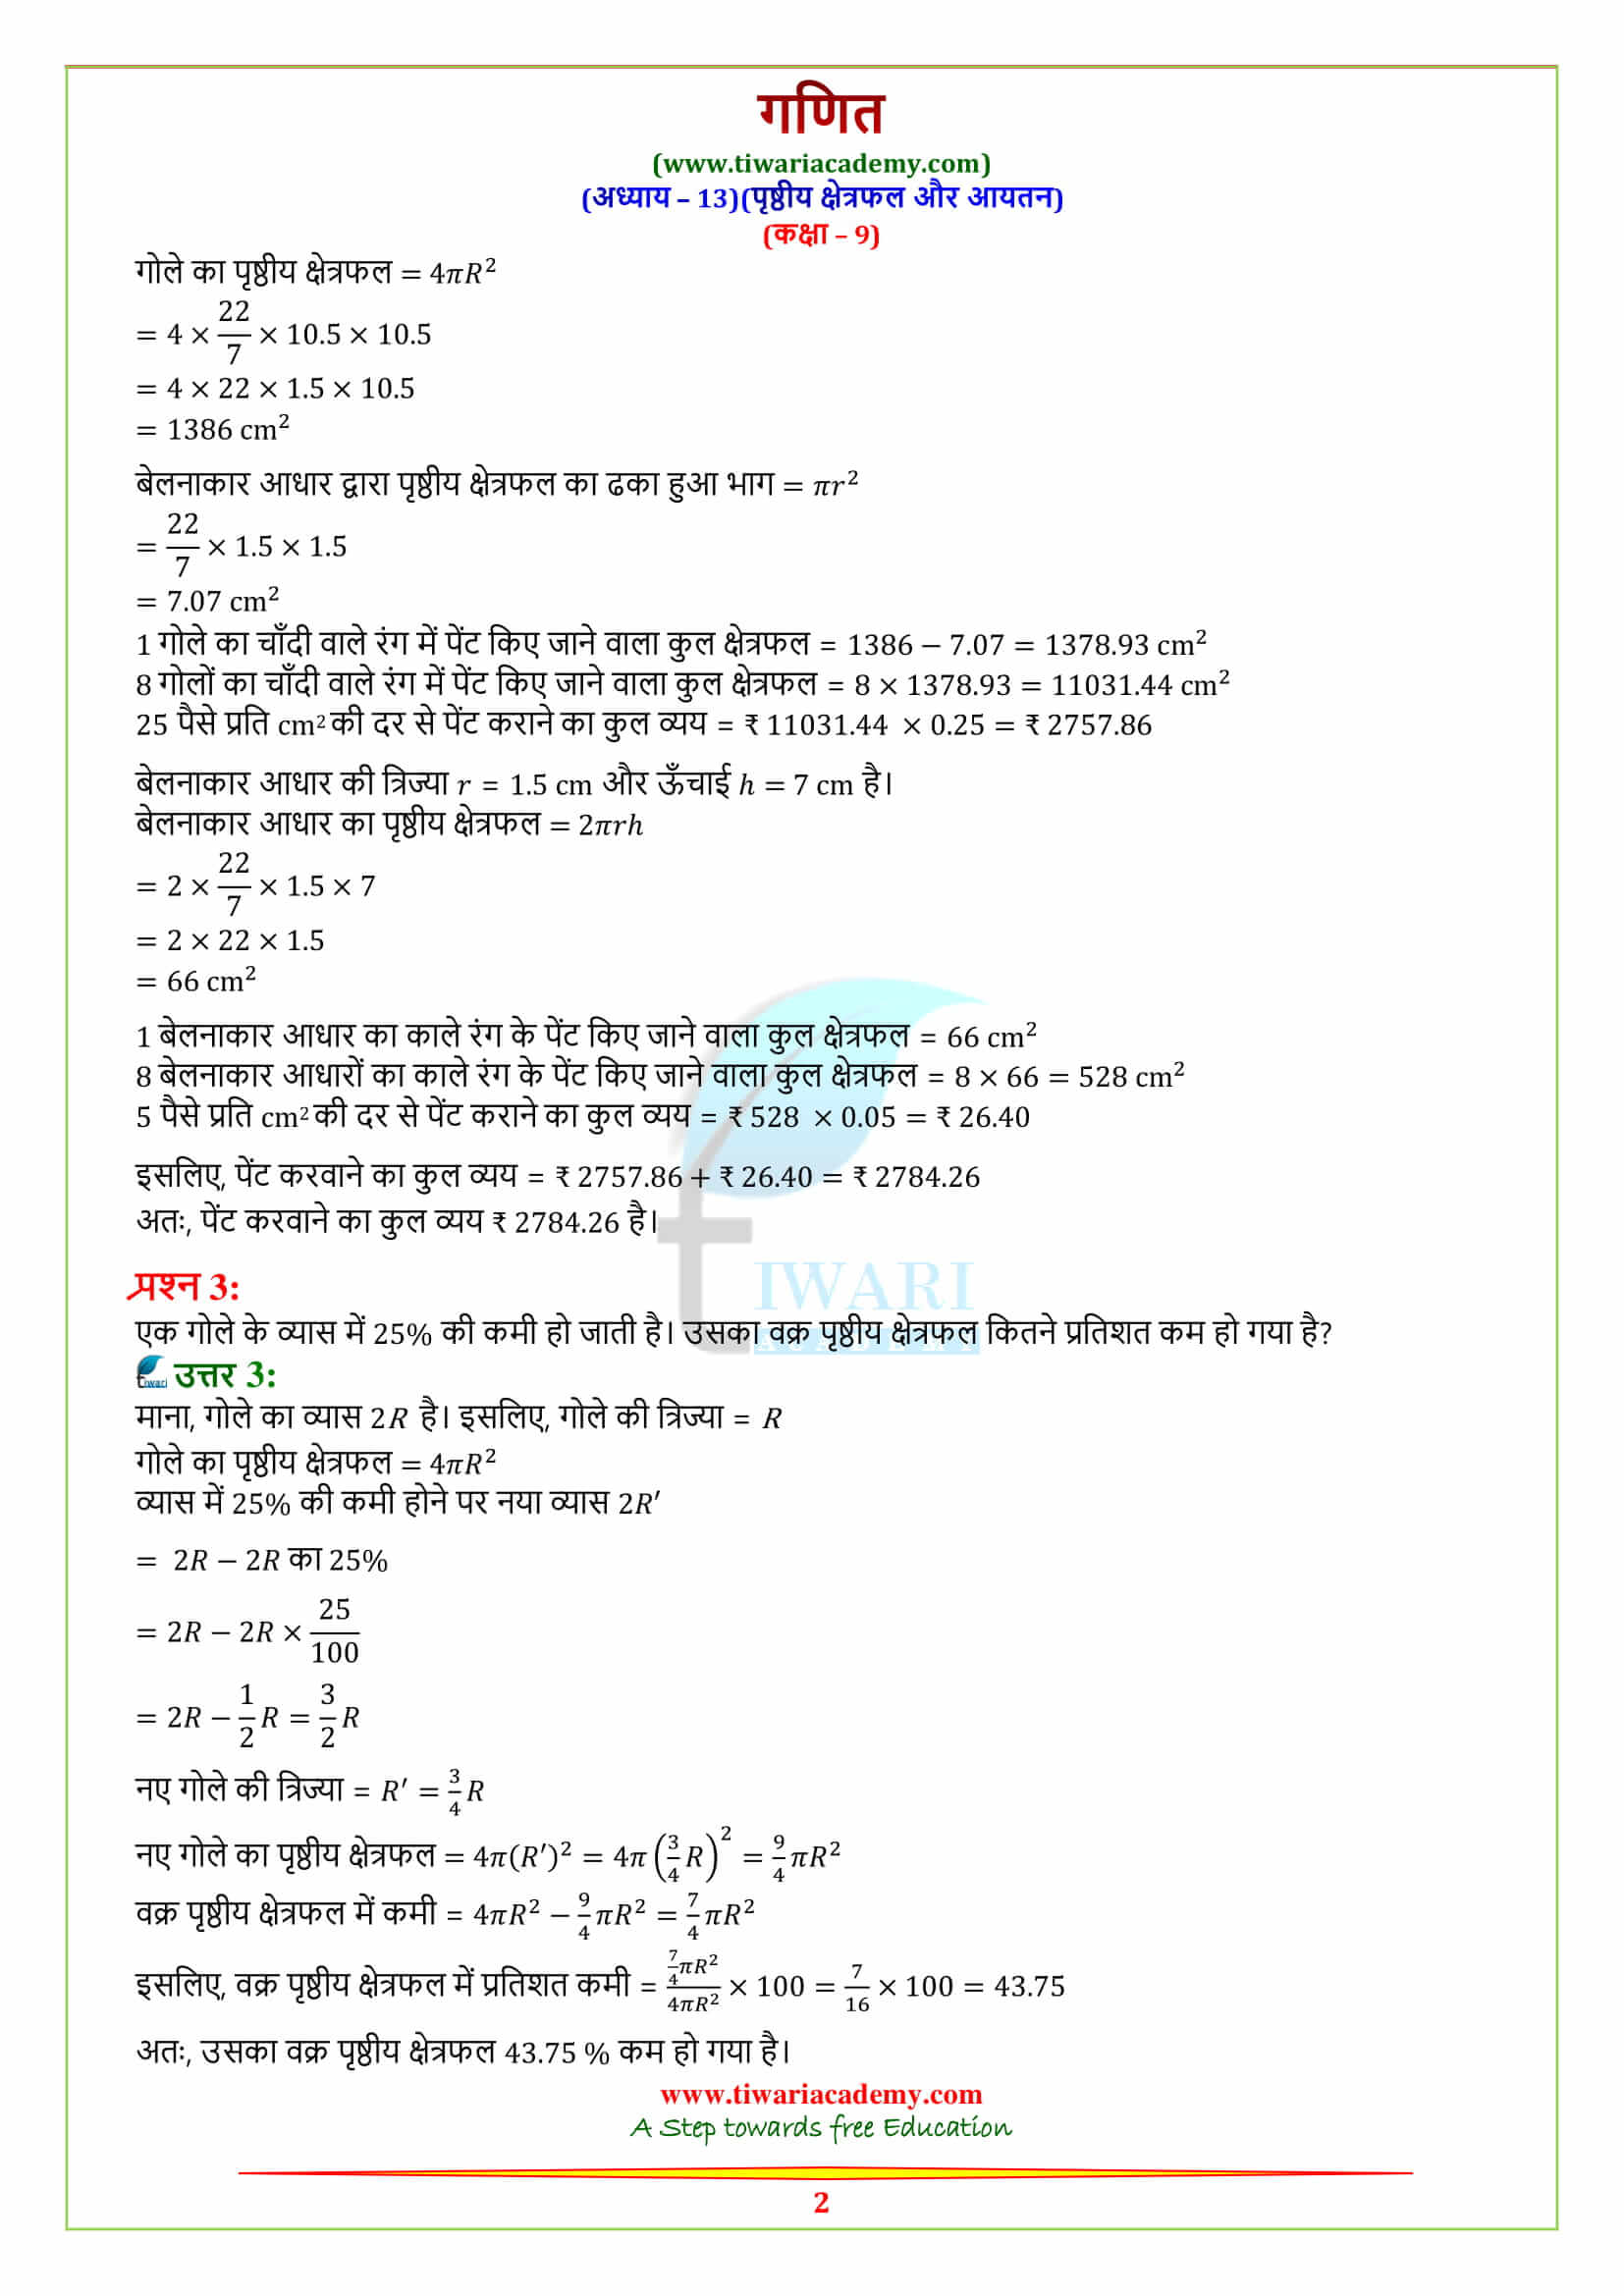 Class 9 Maths Chapter 13 Exercise 13.9 all questions guide free